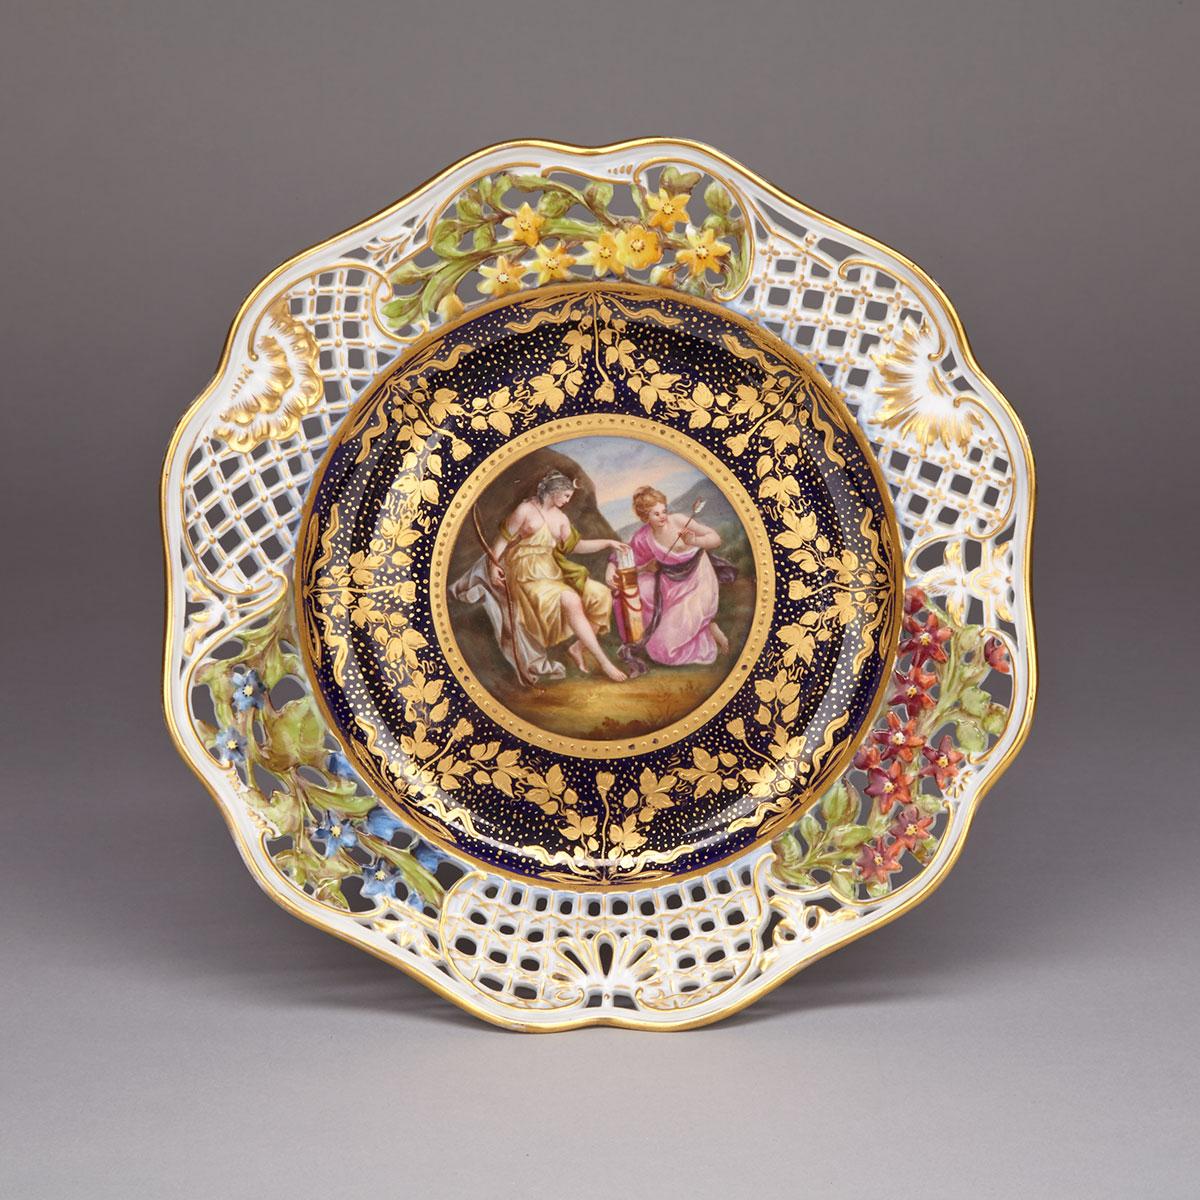 ‘Vienna’ Reticulated Cabinet Plate, ‘Diana’, c.1900